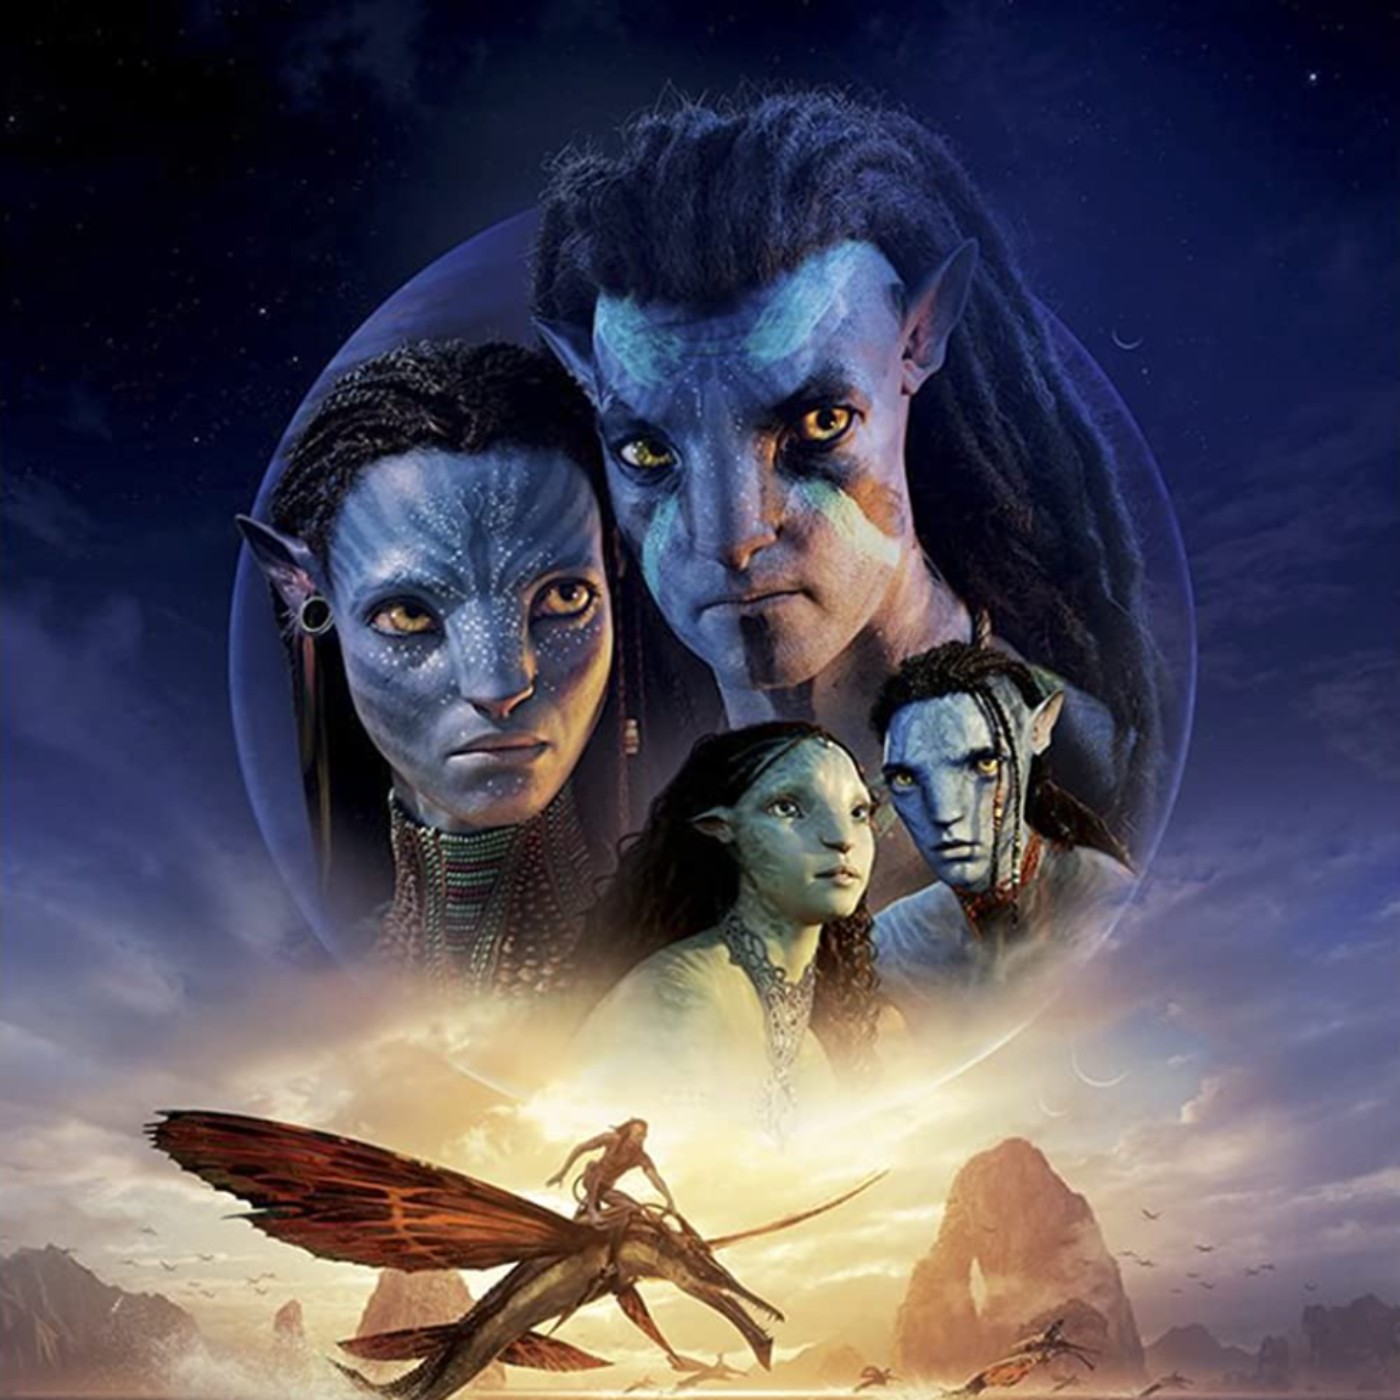 Avatar The Way of Water (2022) Online Streaming FULLMovie Free English Subbed Podcast on SoundOn